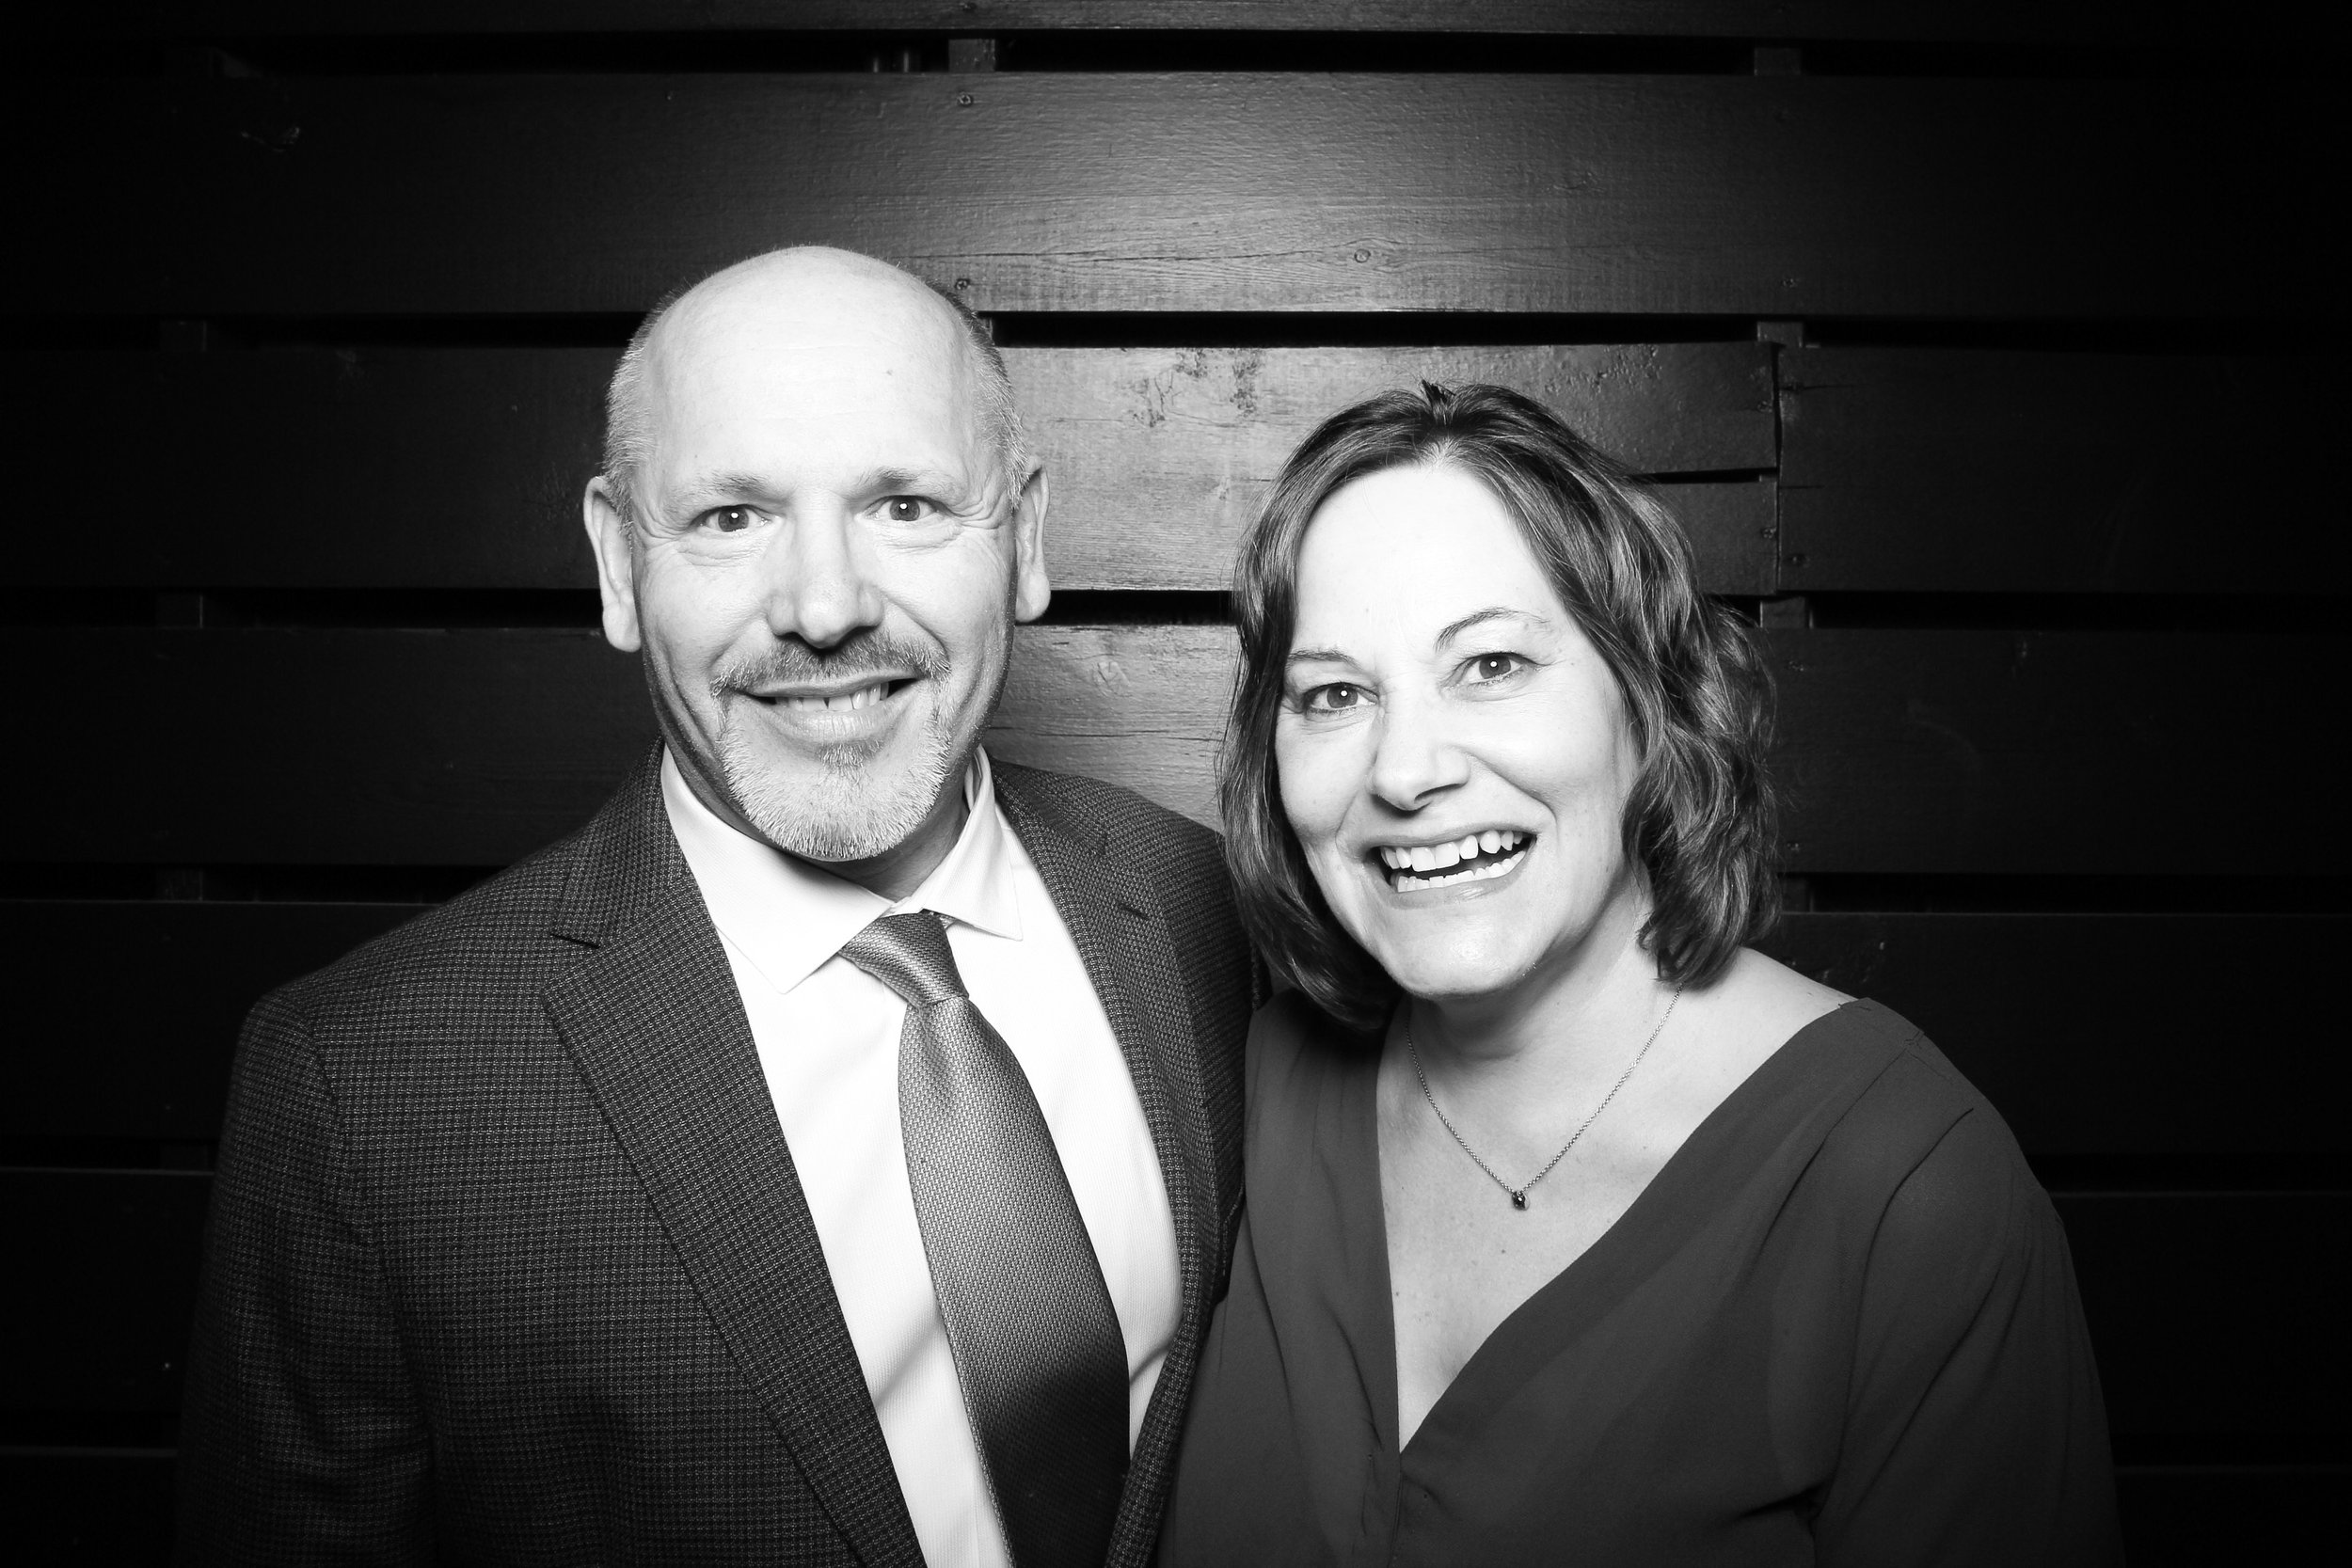 Fotio_Photo_Booth_Chicago_Winery_Clark_Street_Party_Family_Fun_Terrace_Superfans_River_North_19.jpg